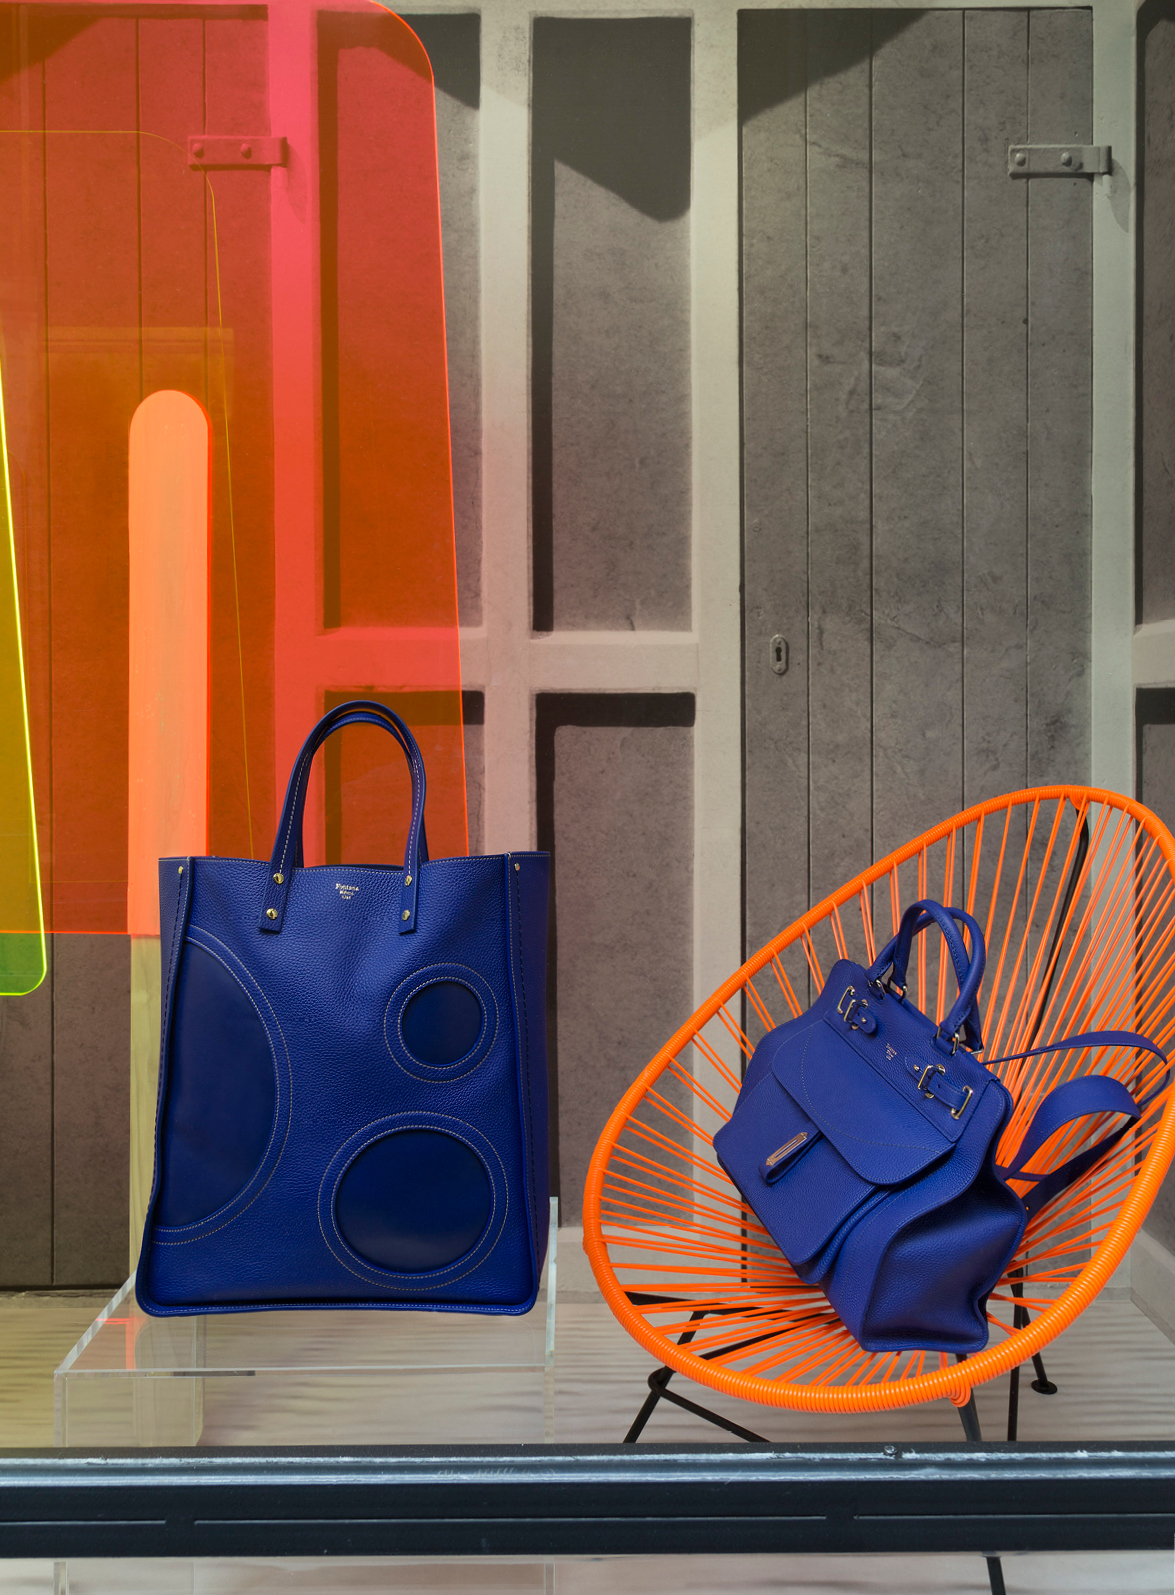 Fontana Milano 1915 electric blue bags, orange chair and fluo popsicles